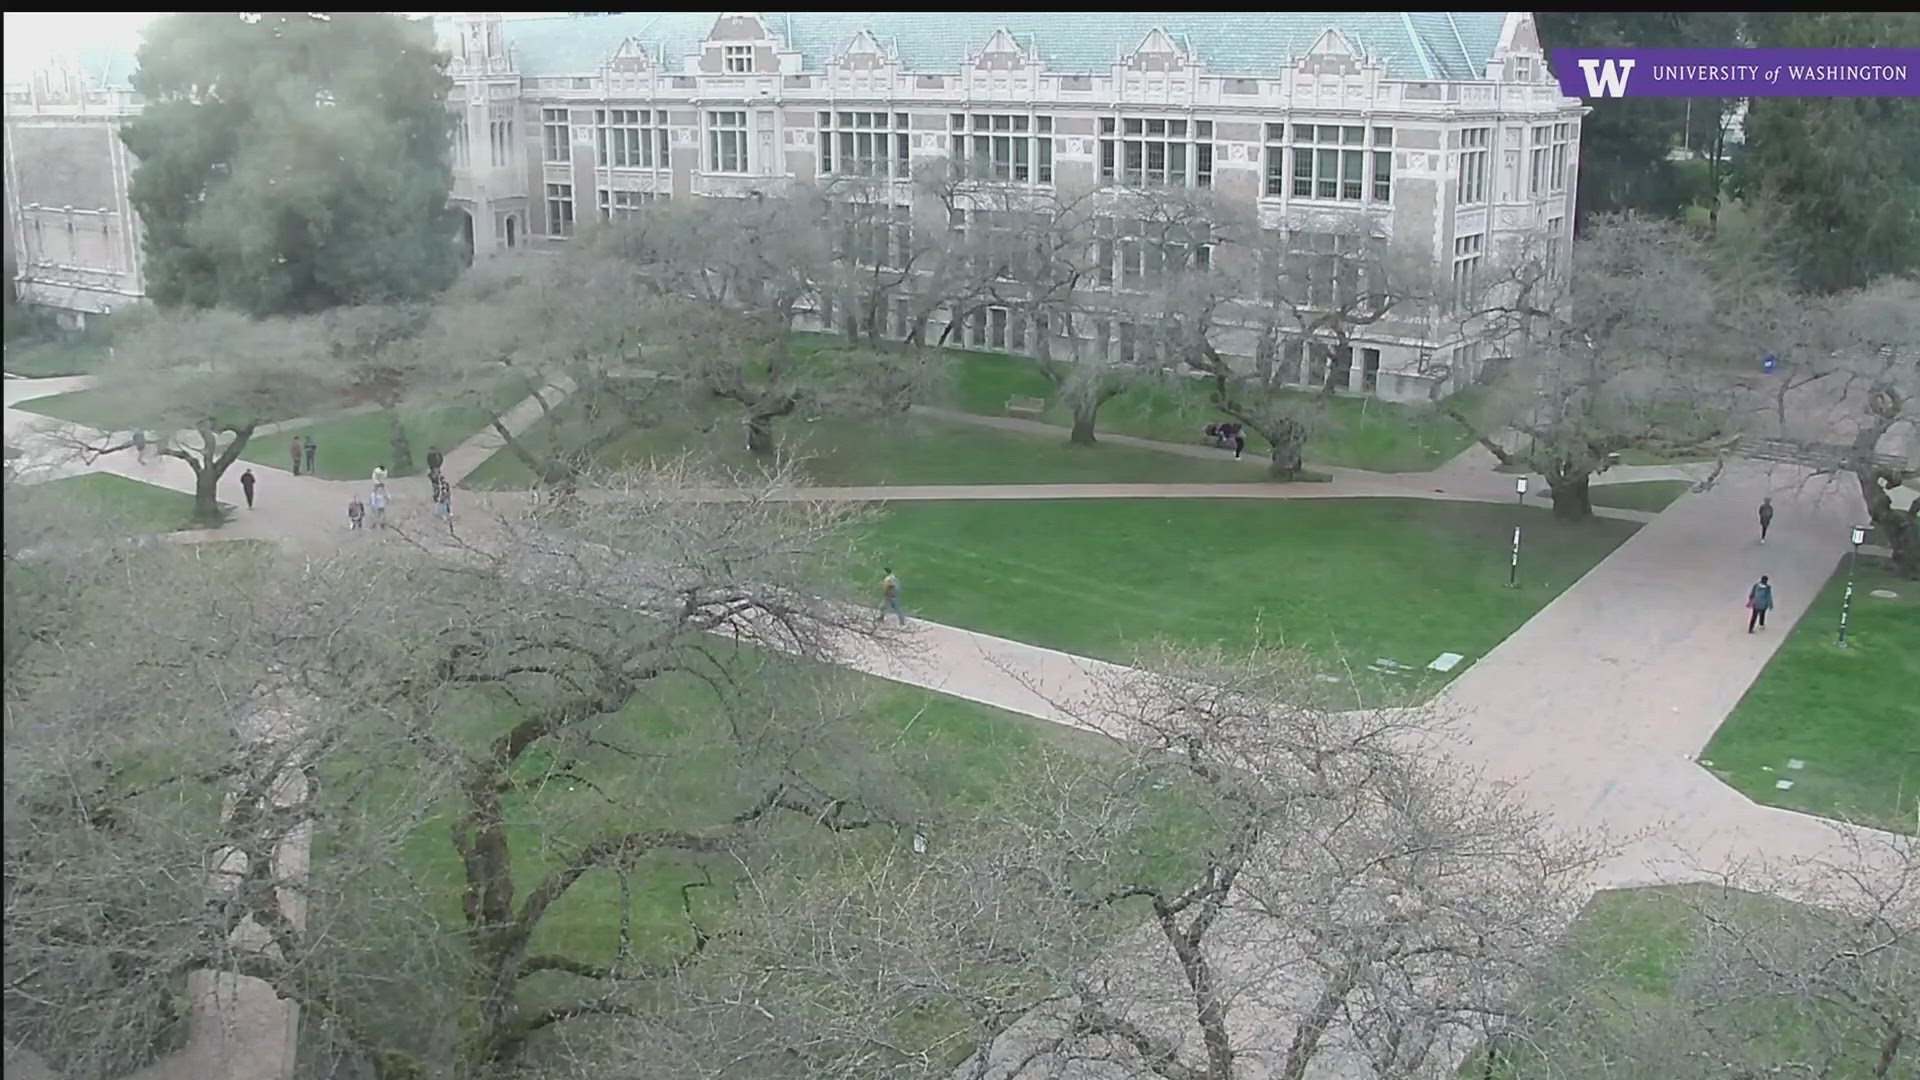 Cold weather delayed the blooming of the iconic cherry trees, but UW’s arborist said that they are on track to reach peak bloom at the beginning of April.